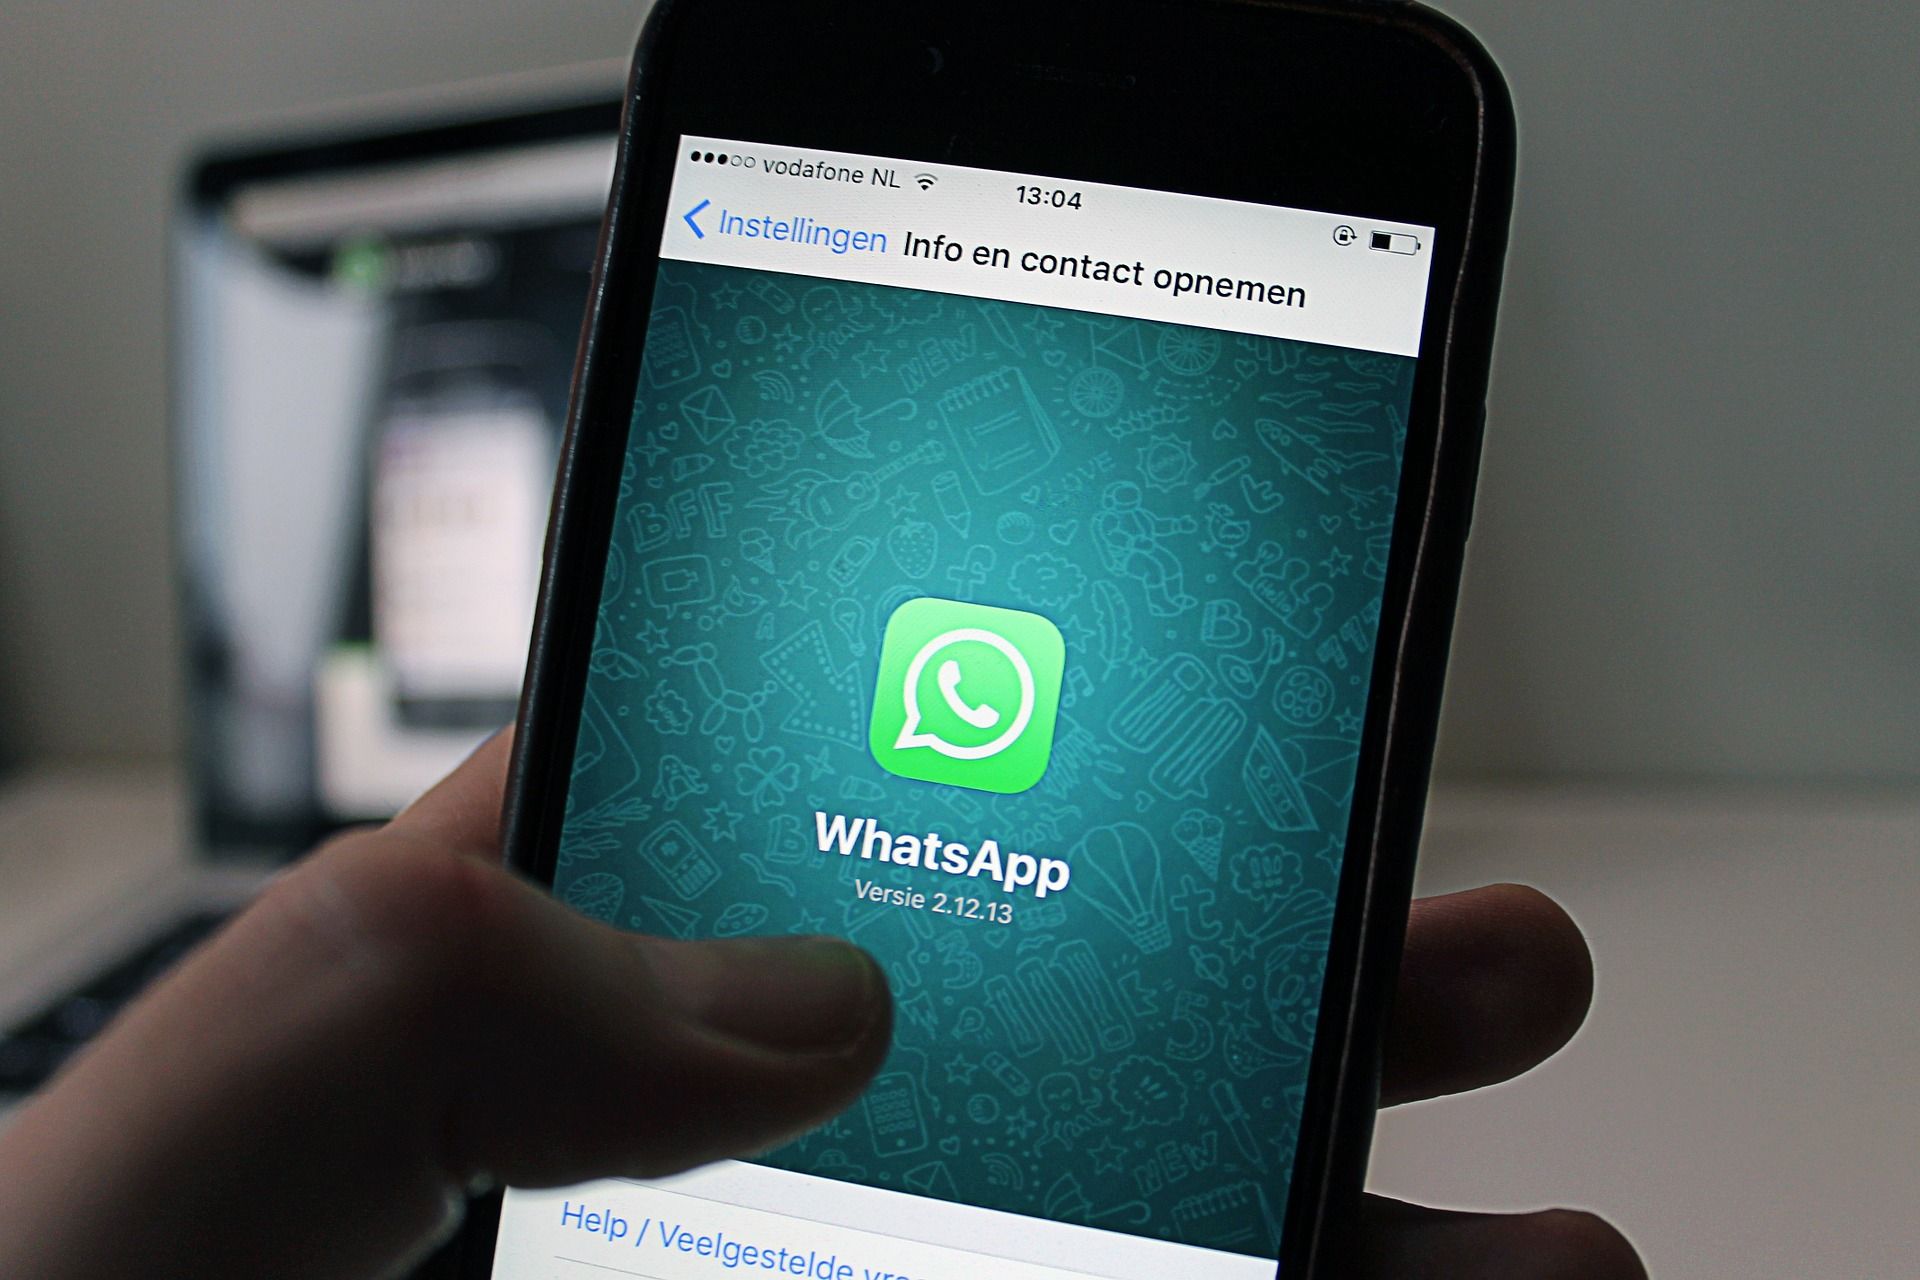 WhatsApp wants people to ‘gradually review the policy’, pushes deadline